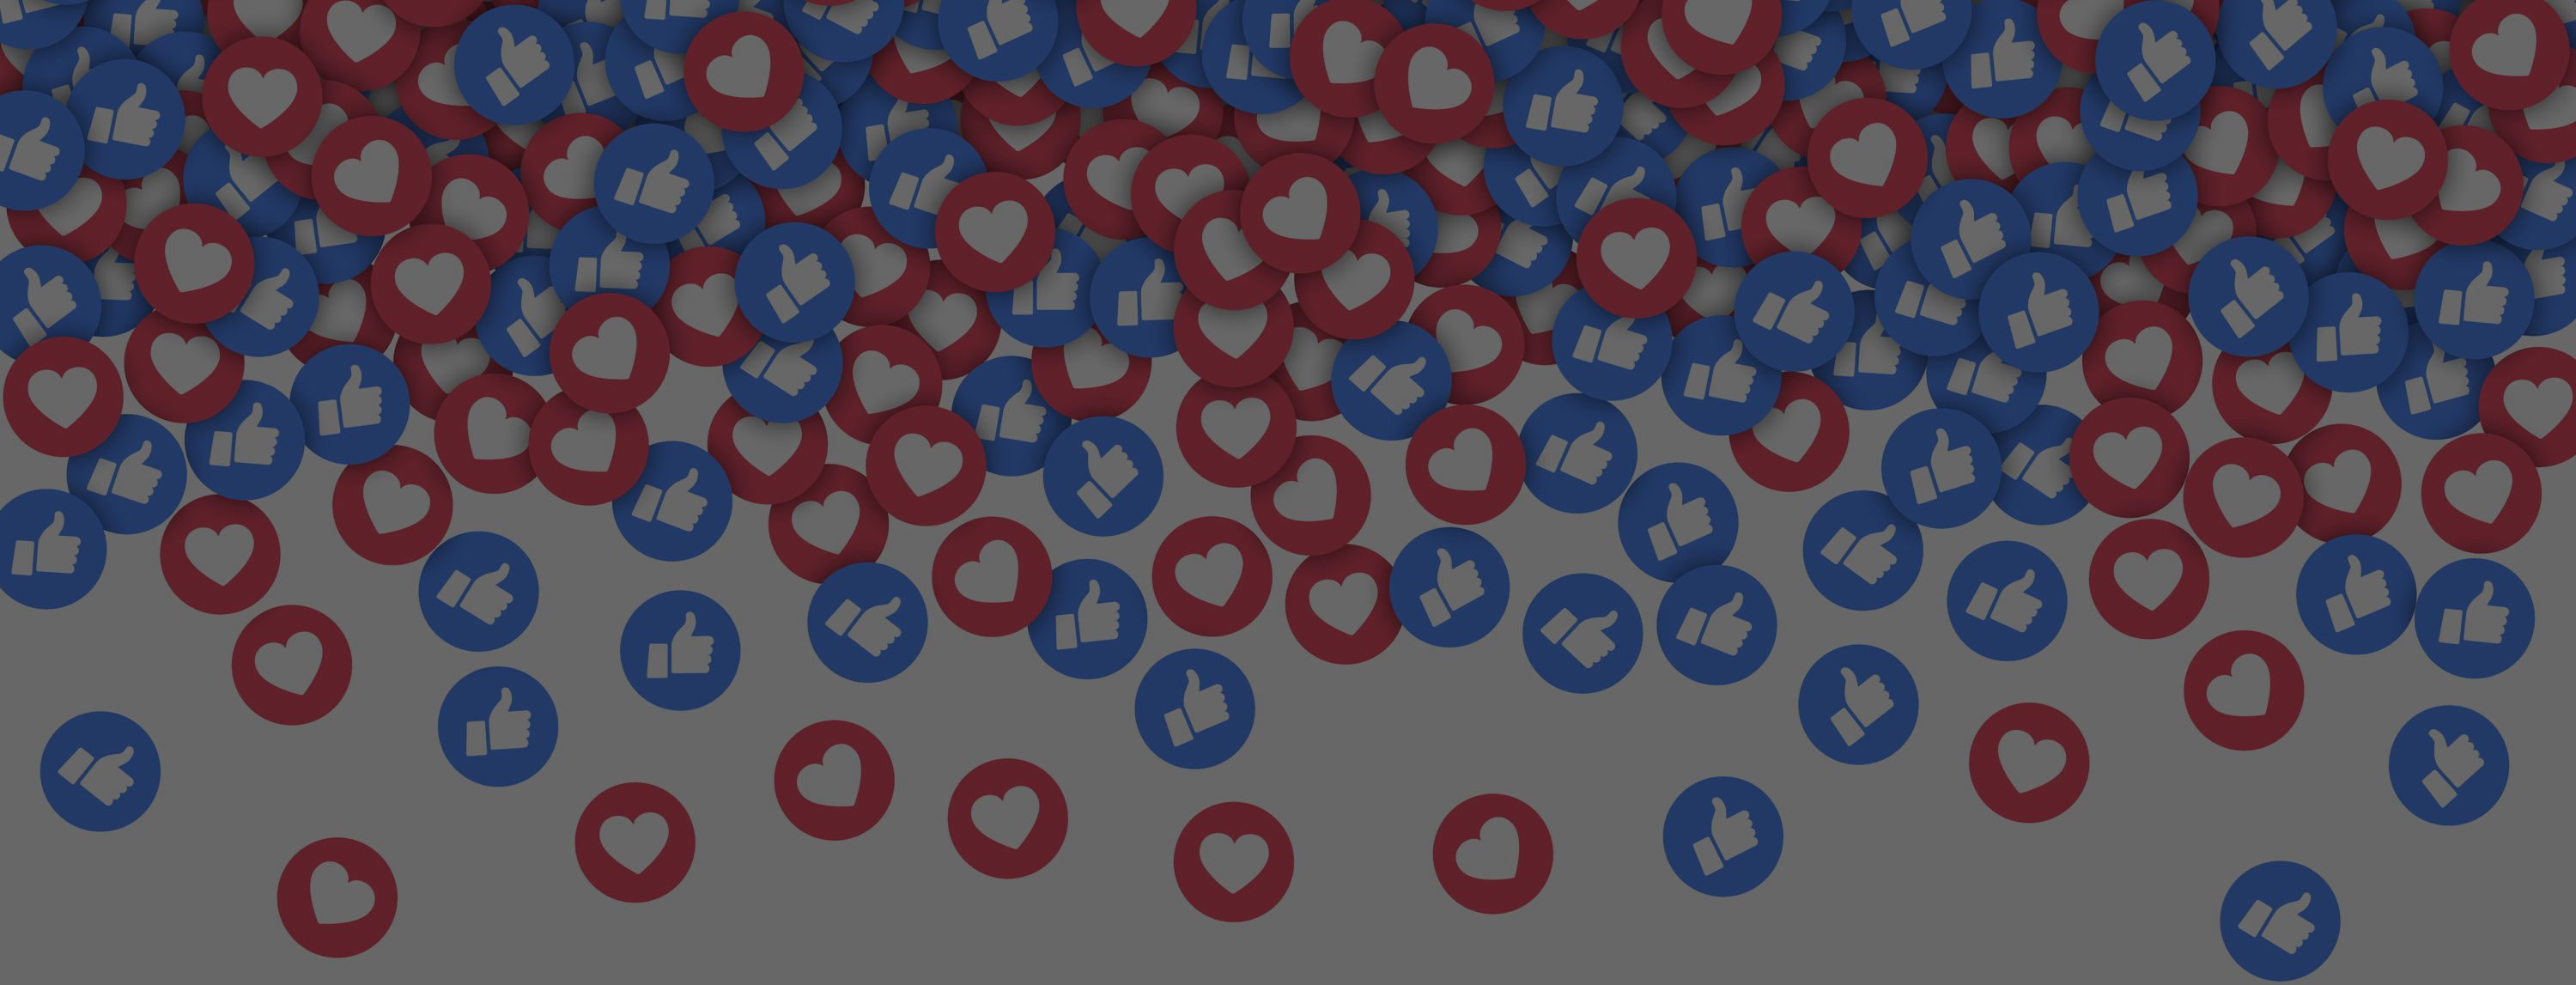 facebooks thumbs and hearts in pile